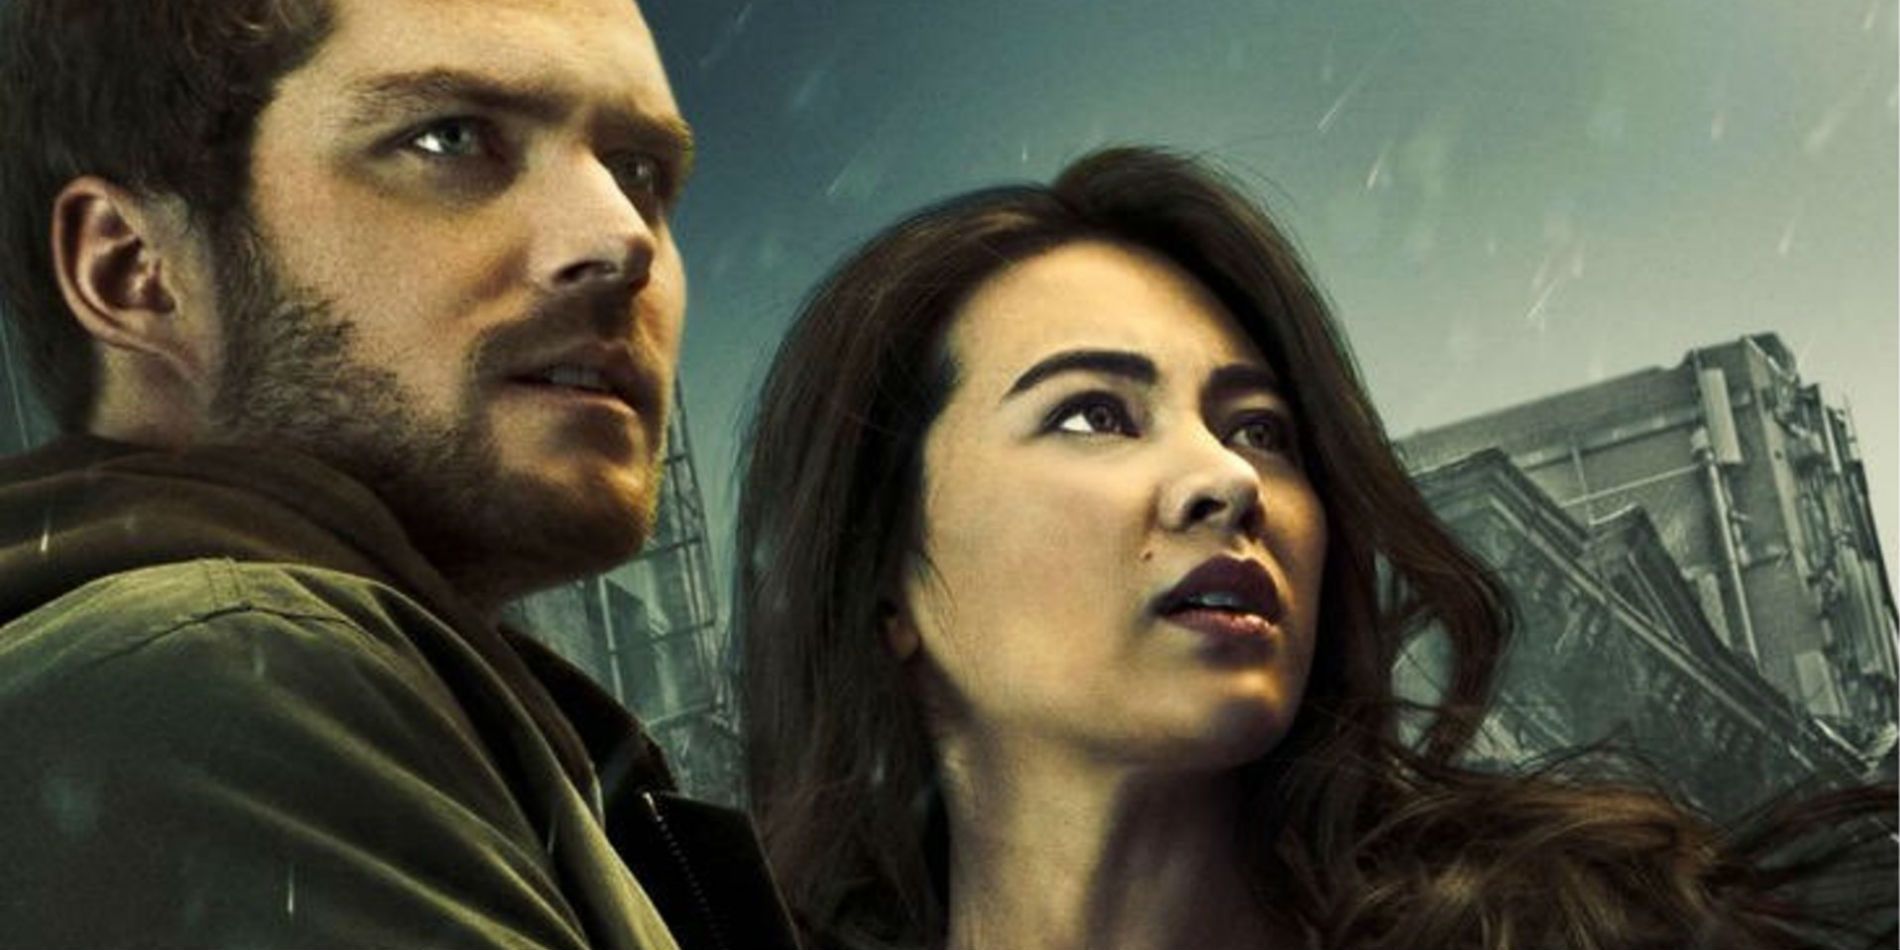 Marvel's New Iron Fist Revealed - And Allocated (Spoilers)